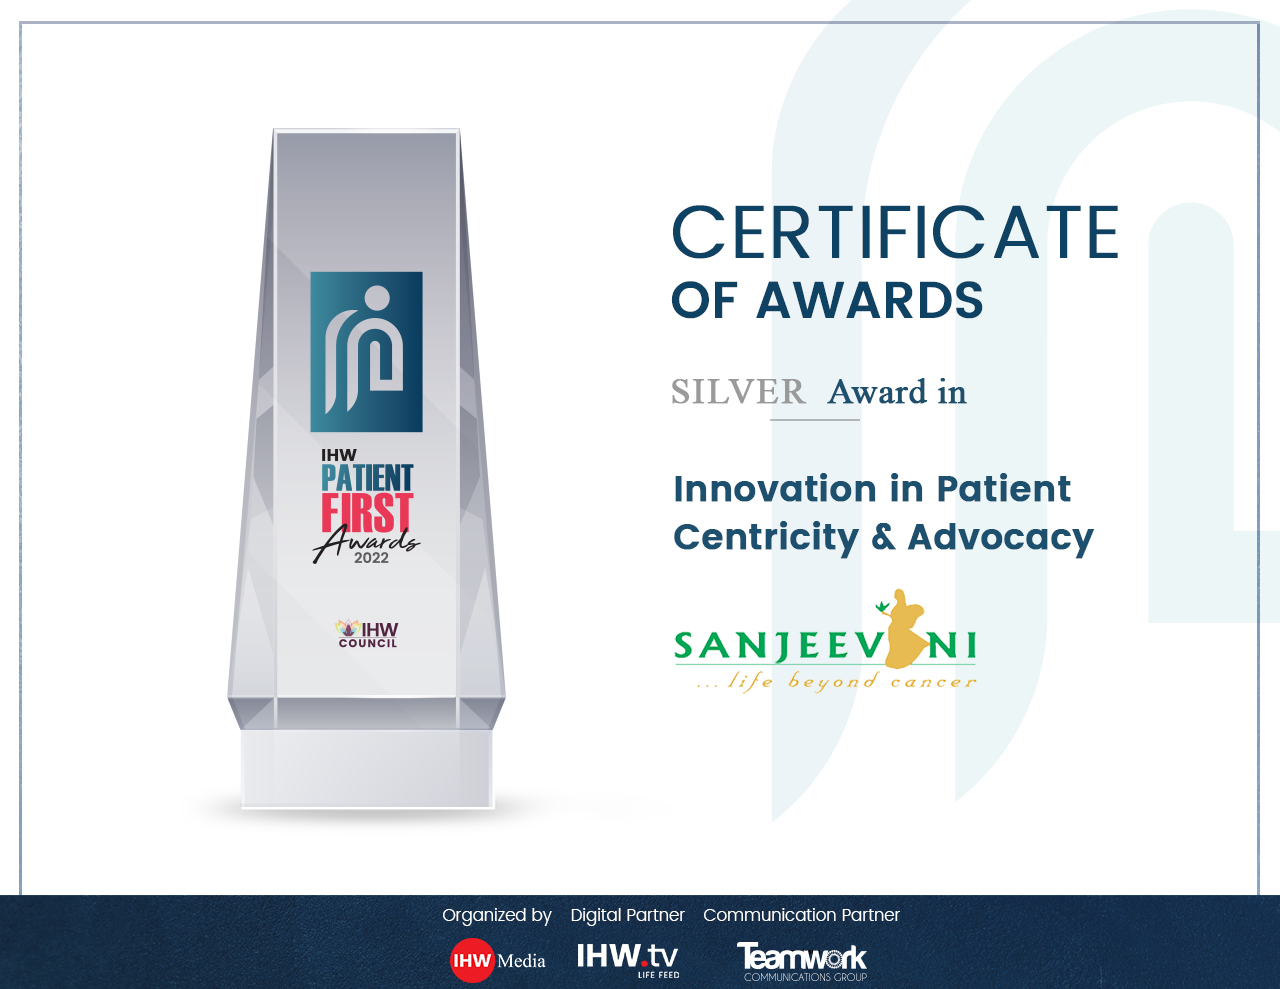 IHW Patient First Award